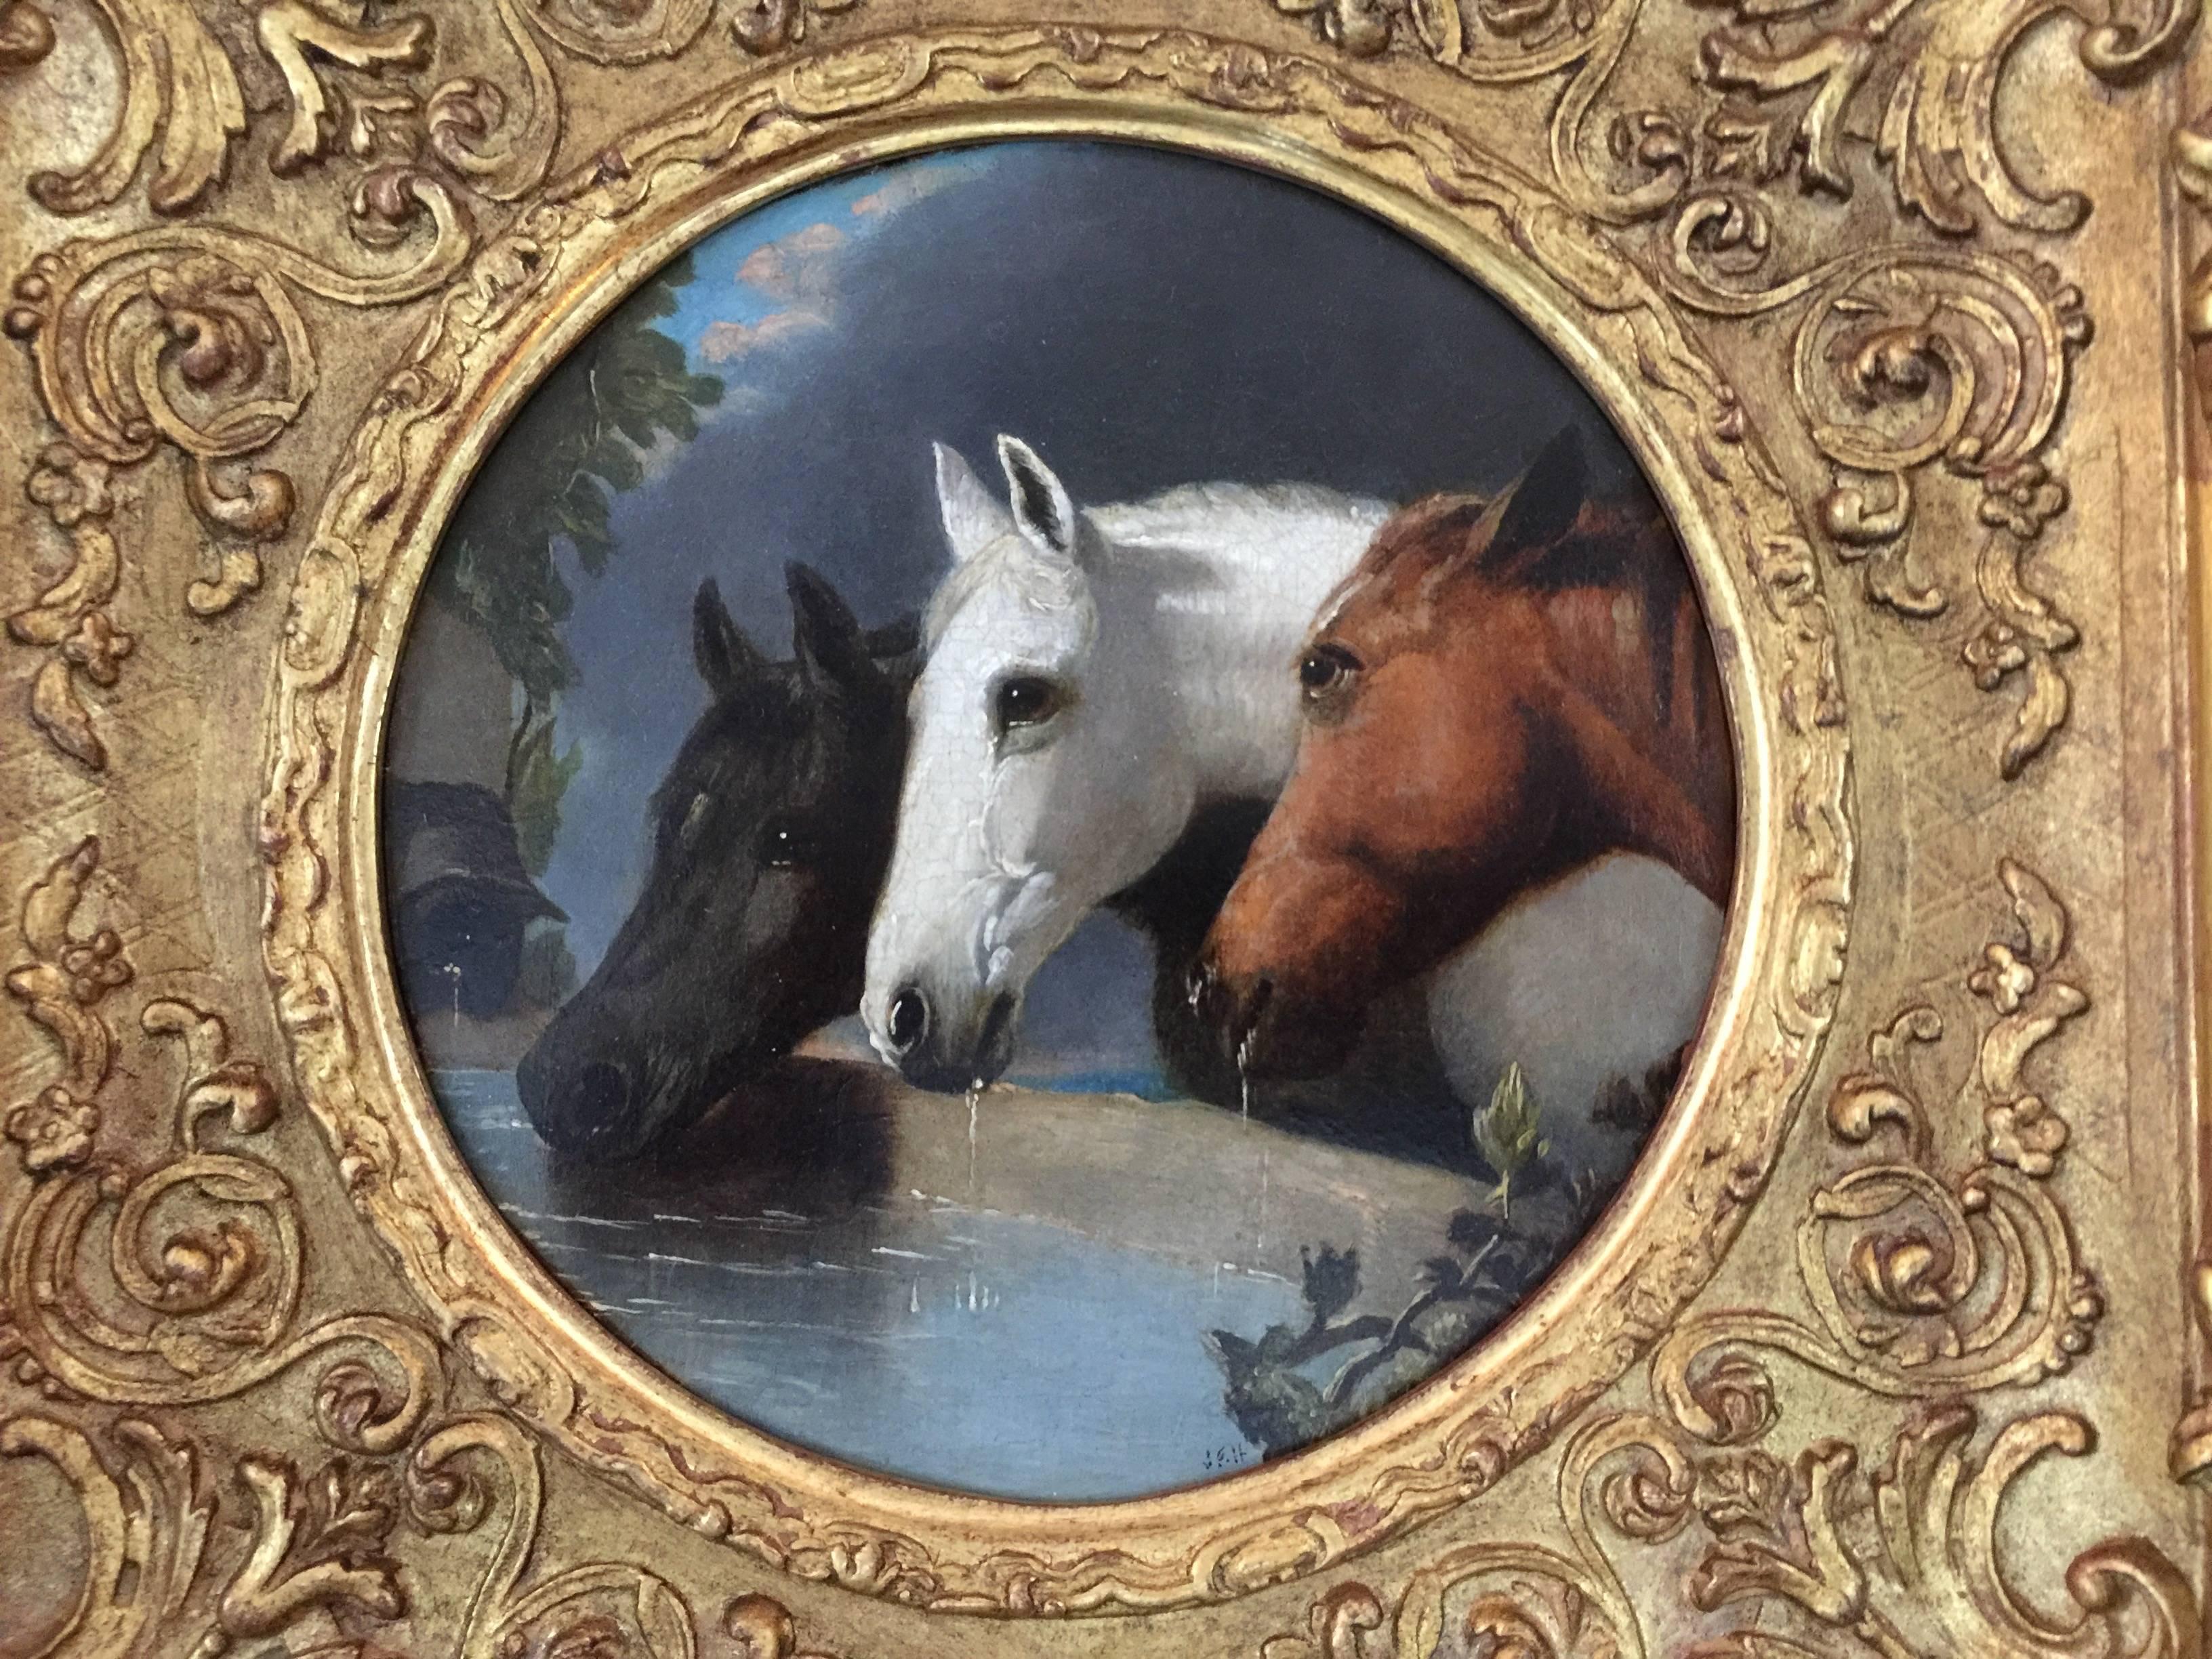 Three English Horse Heads in a stable - Painting by John Frederick Herring Jr.